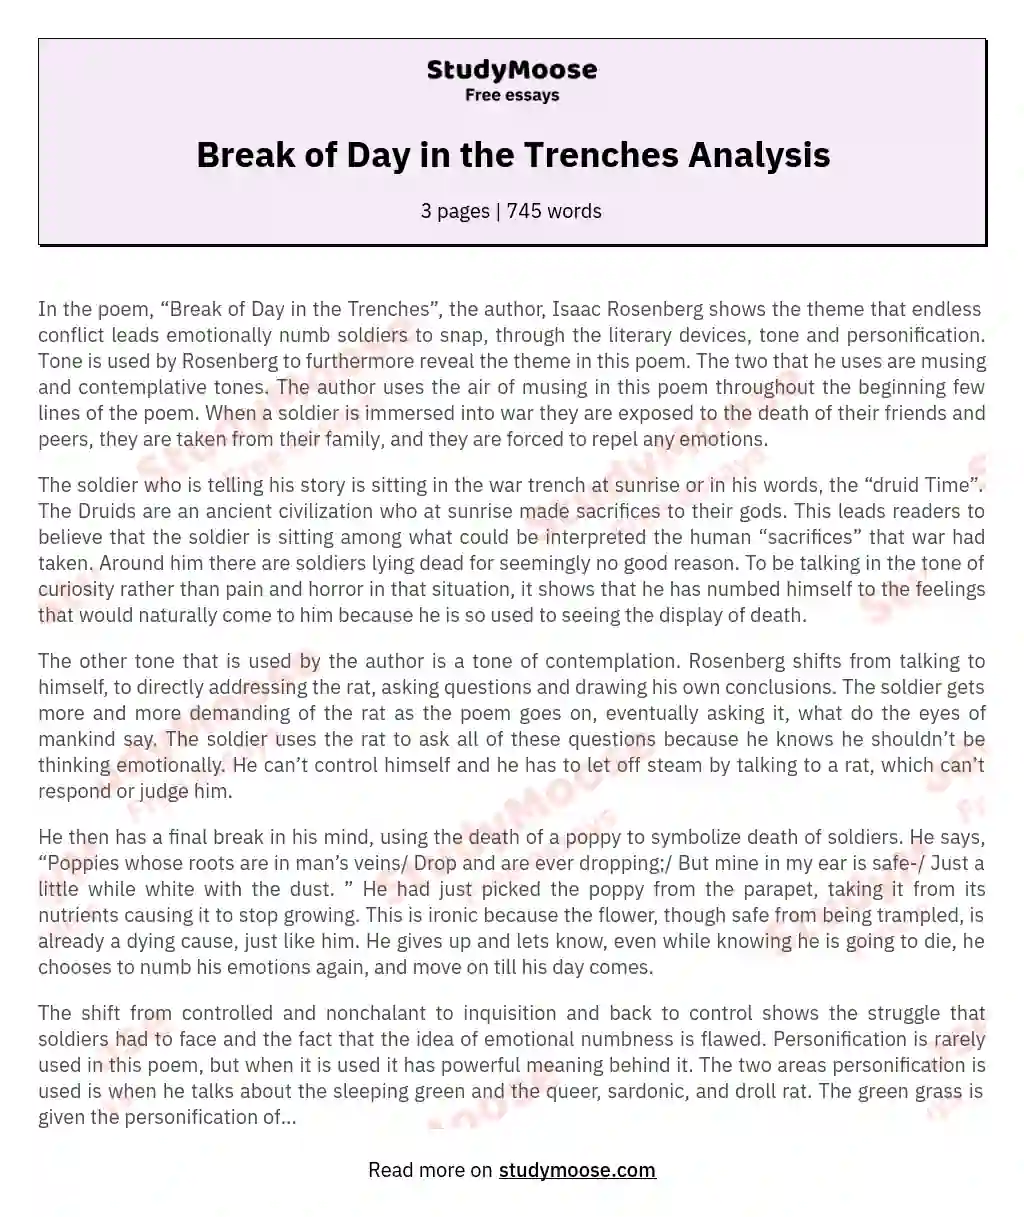 Break of Day in the Trenches Analysis essay